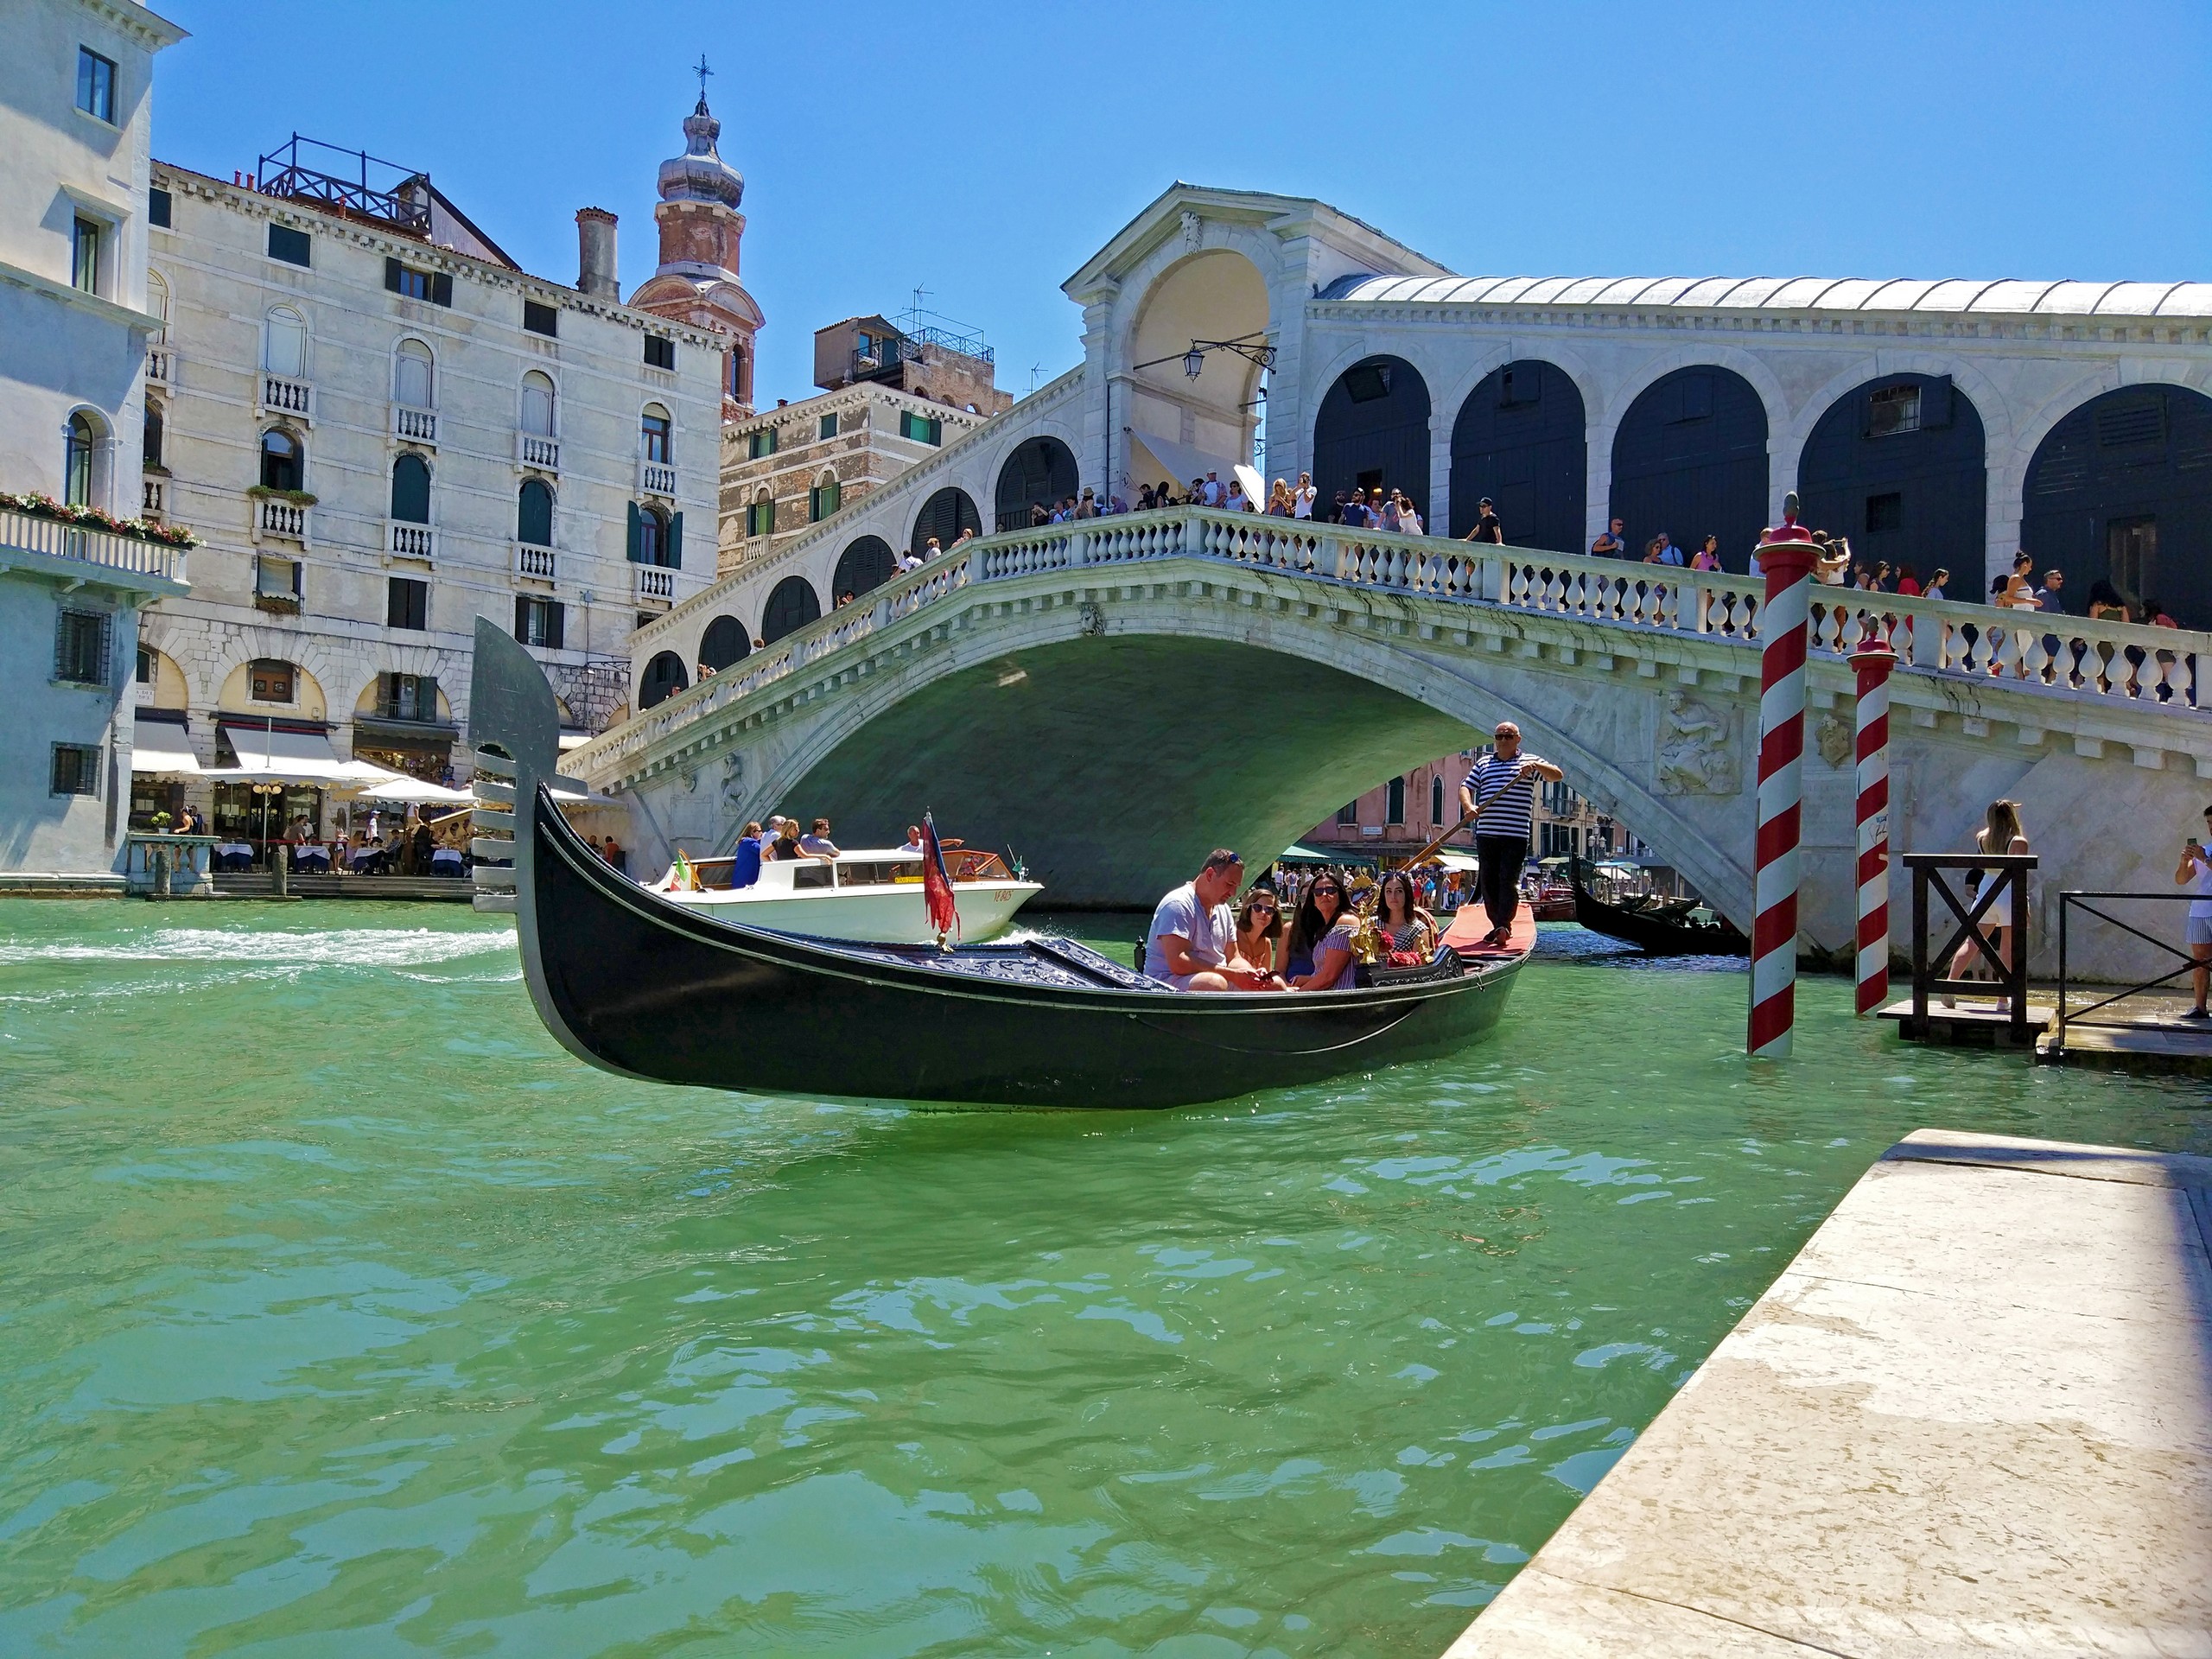 Group of tourists in a boat in Venice